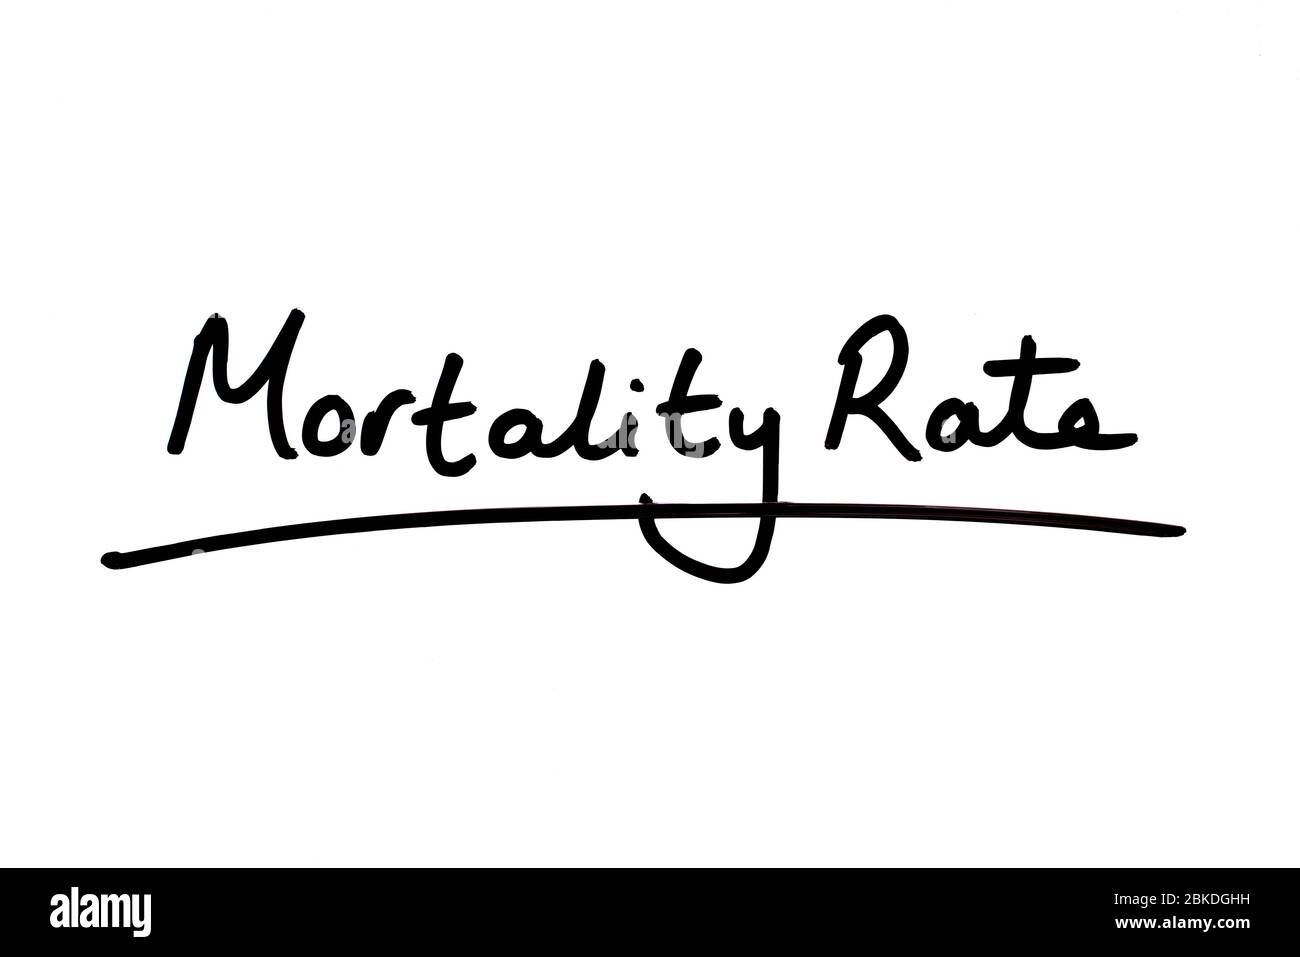 Mortality Rate handwritten on a white background. Stock Photo